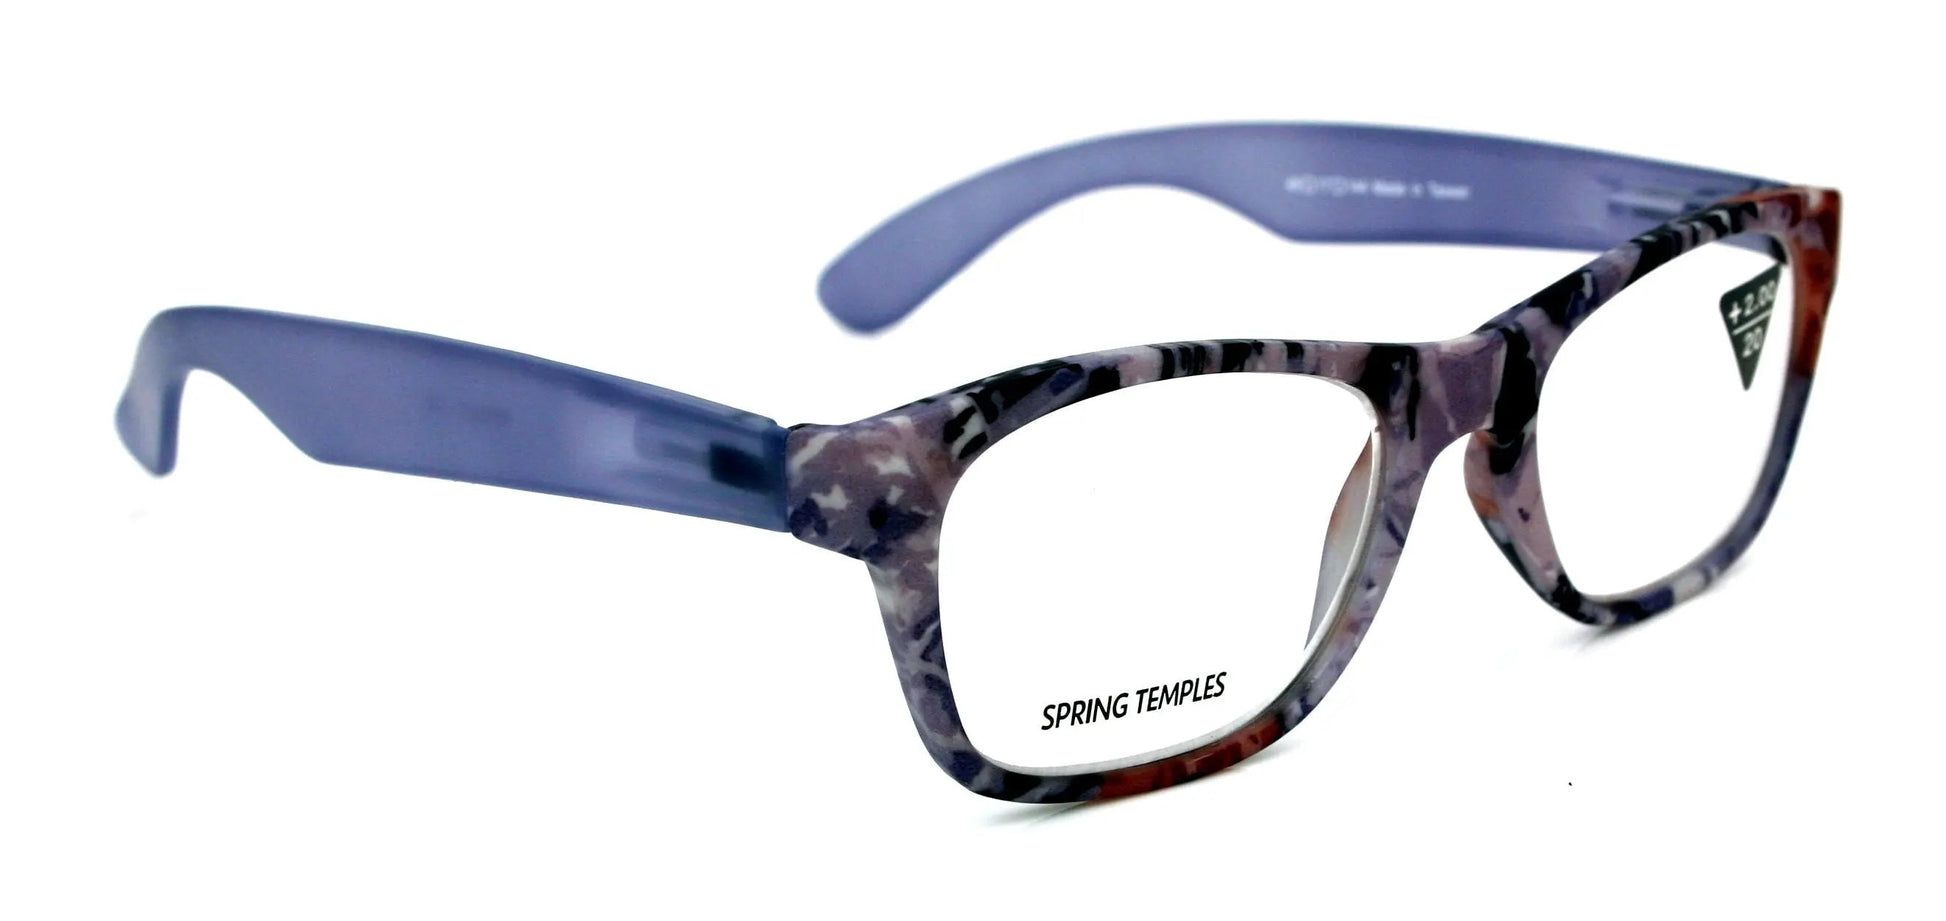 The Forester, (Premium) Reading Glasses, High End Reader +1.25 to +3 Magnifying Wayfarer Style (Blue Camouflage) Frame. NY Fifth Avenue